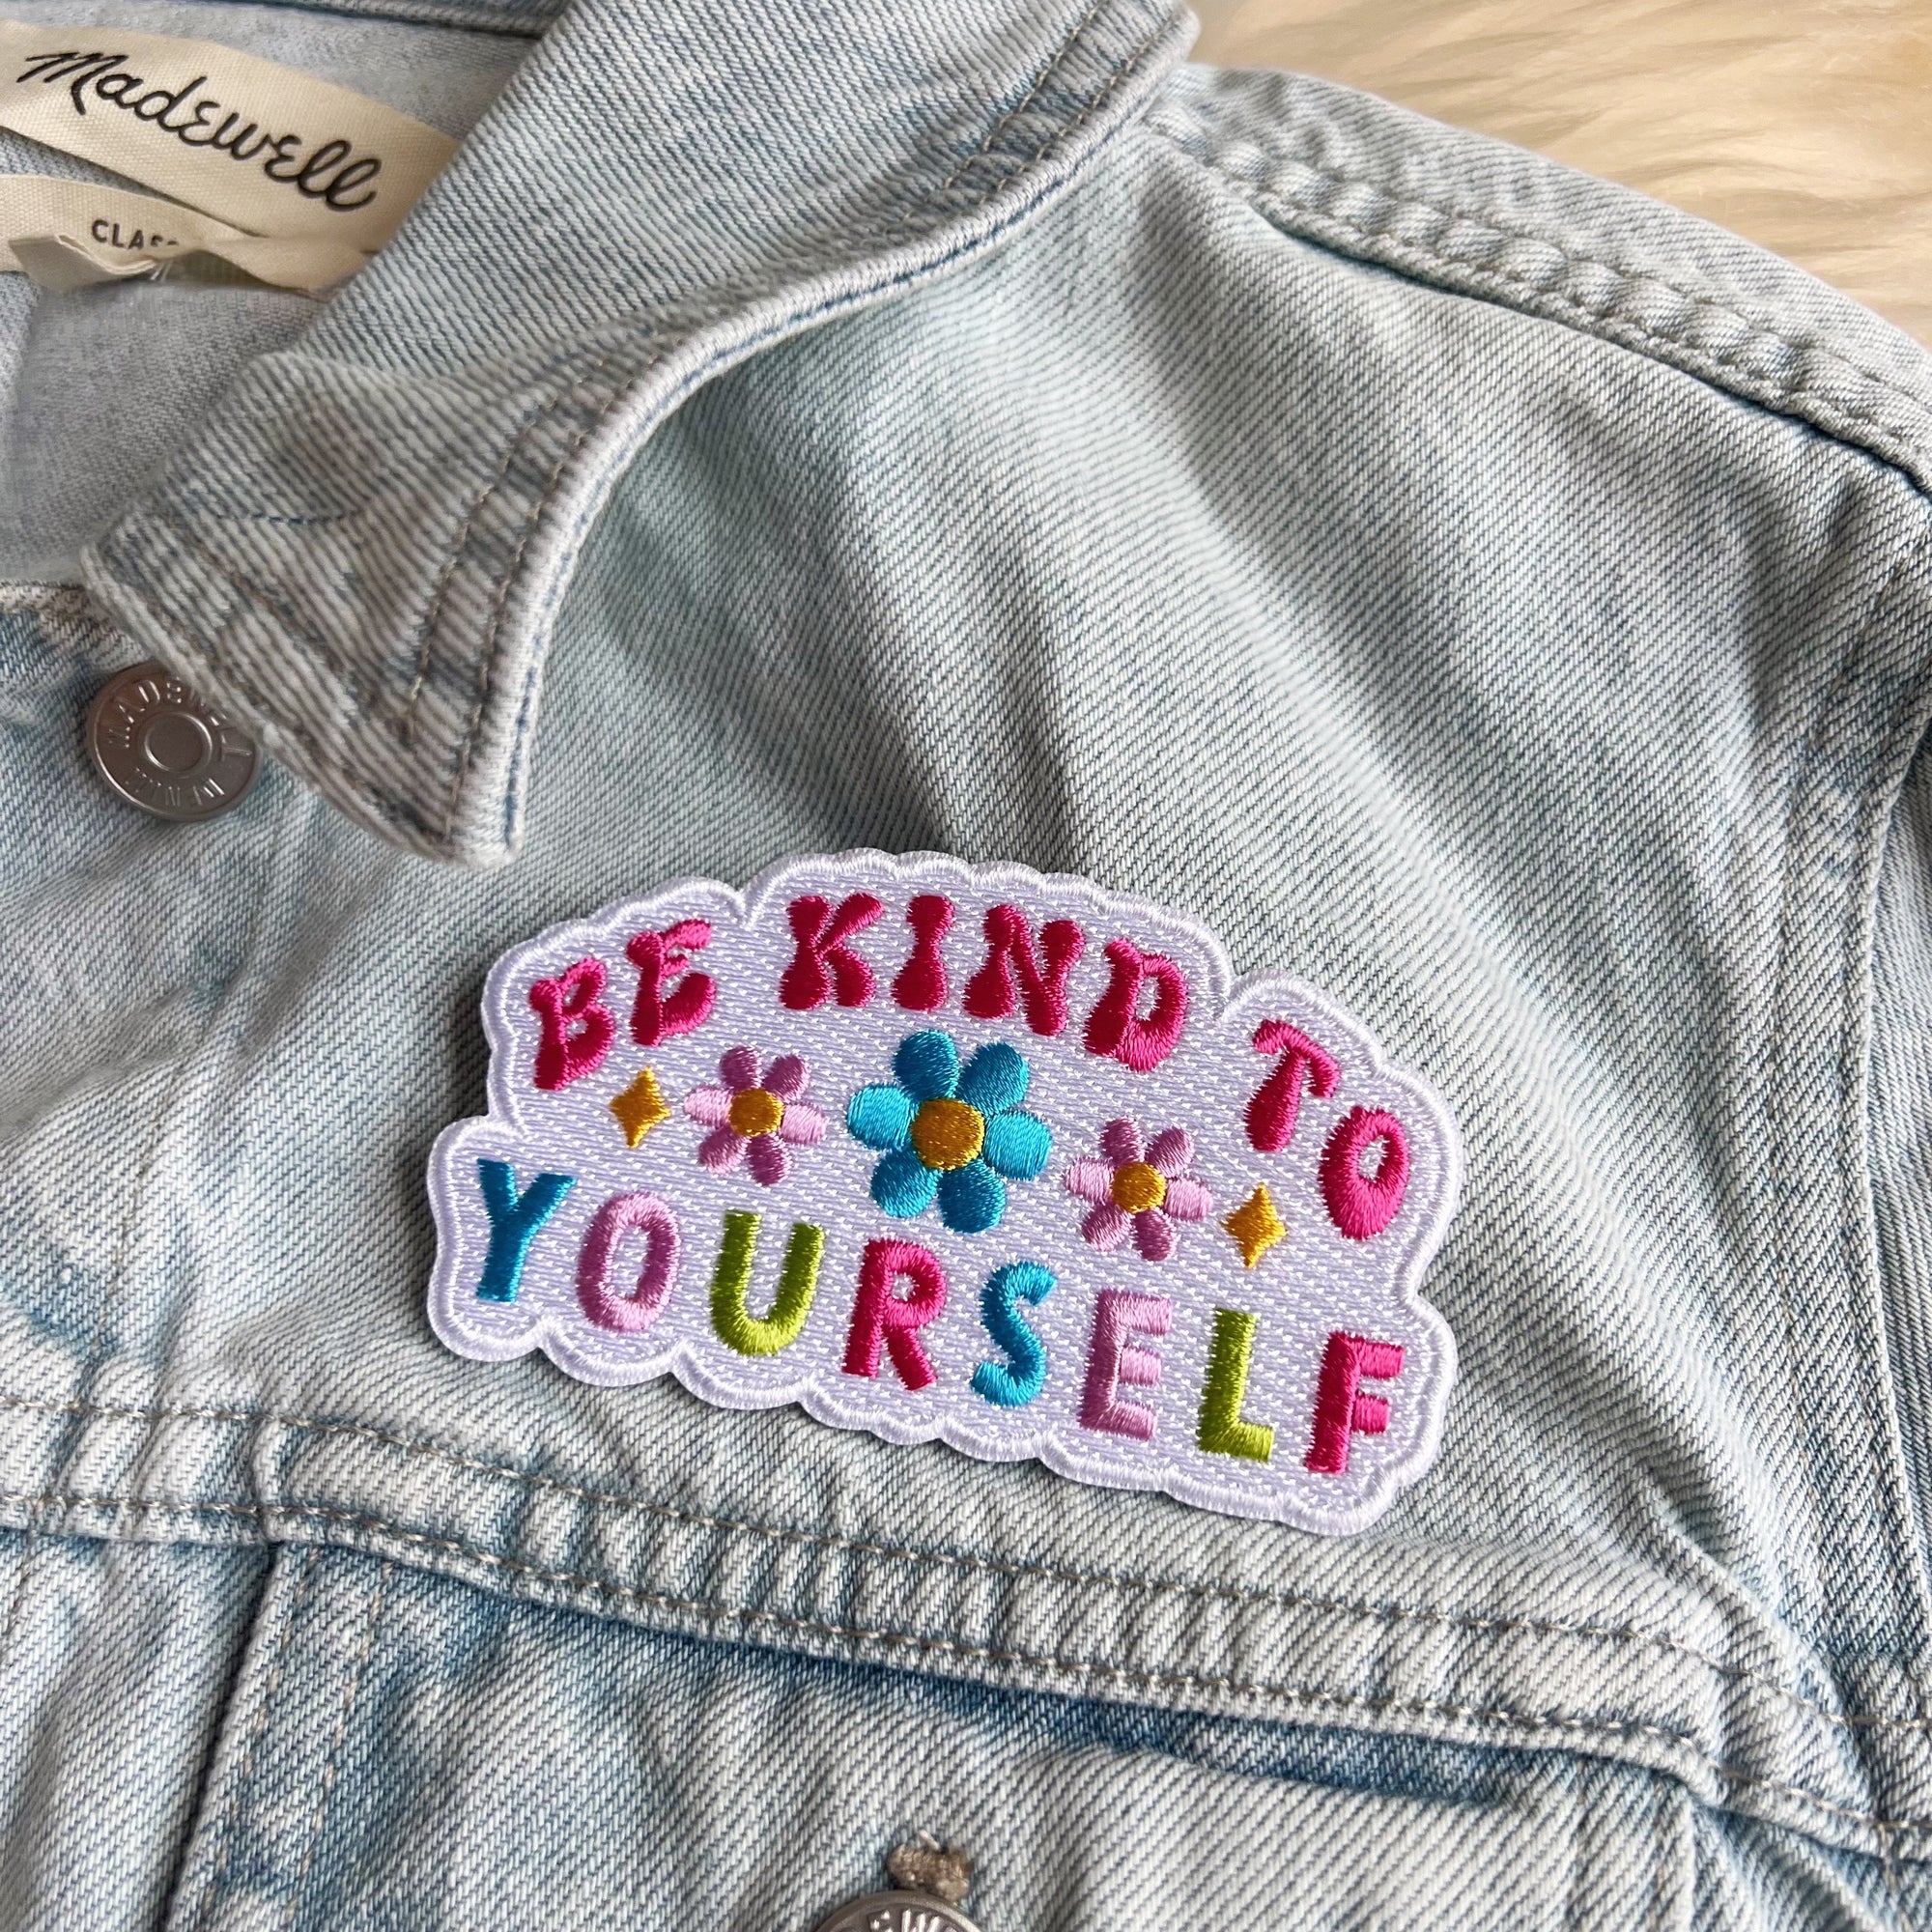 Positivity Quote Patches - Birch Hill Studio